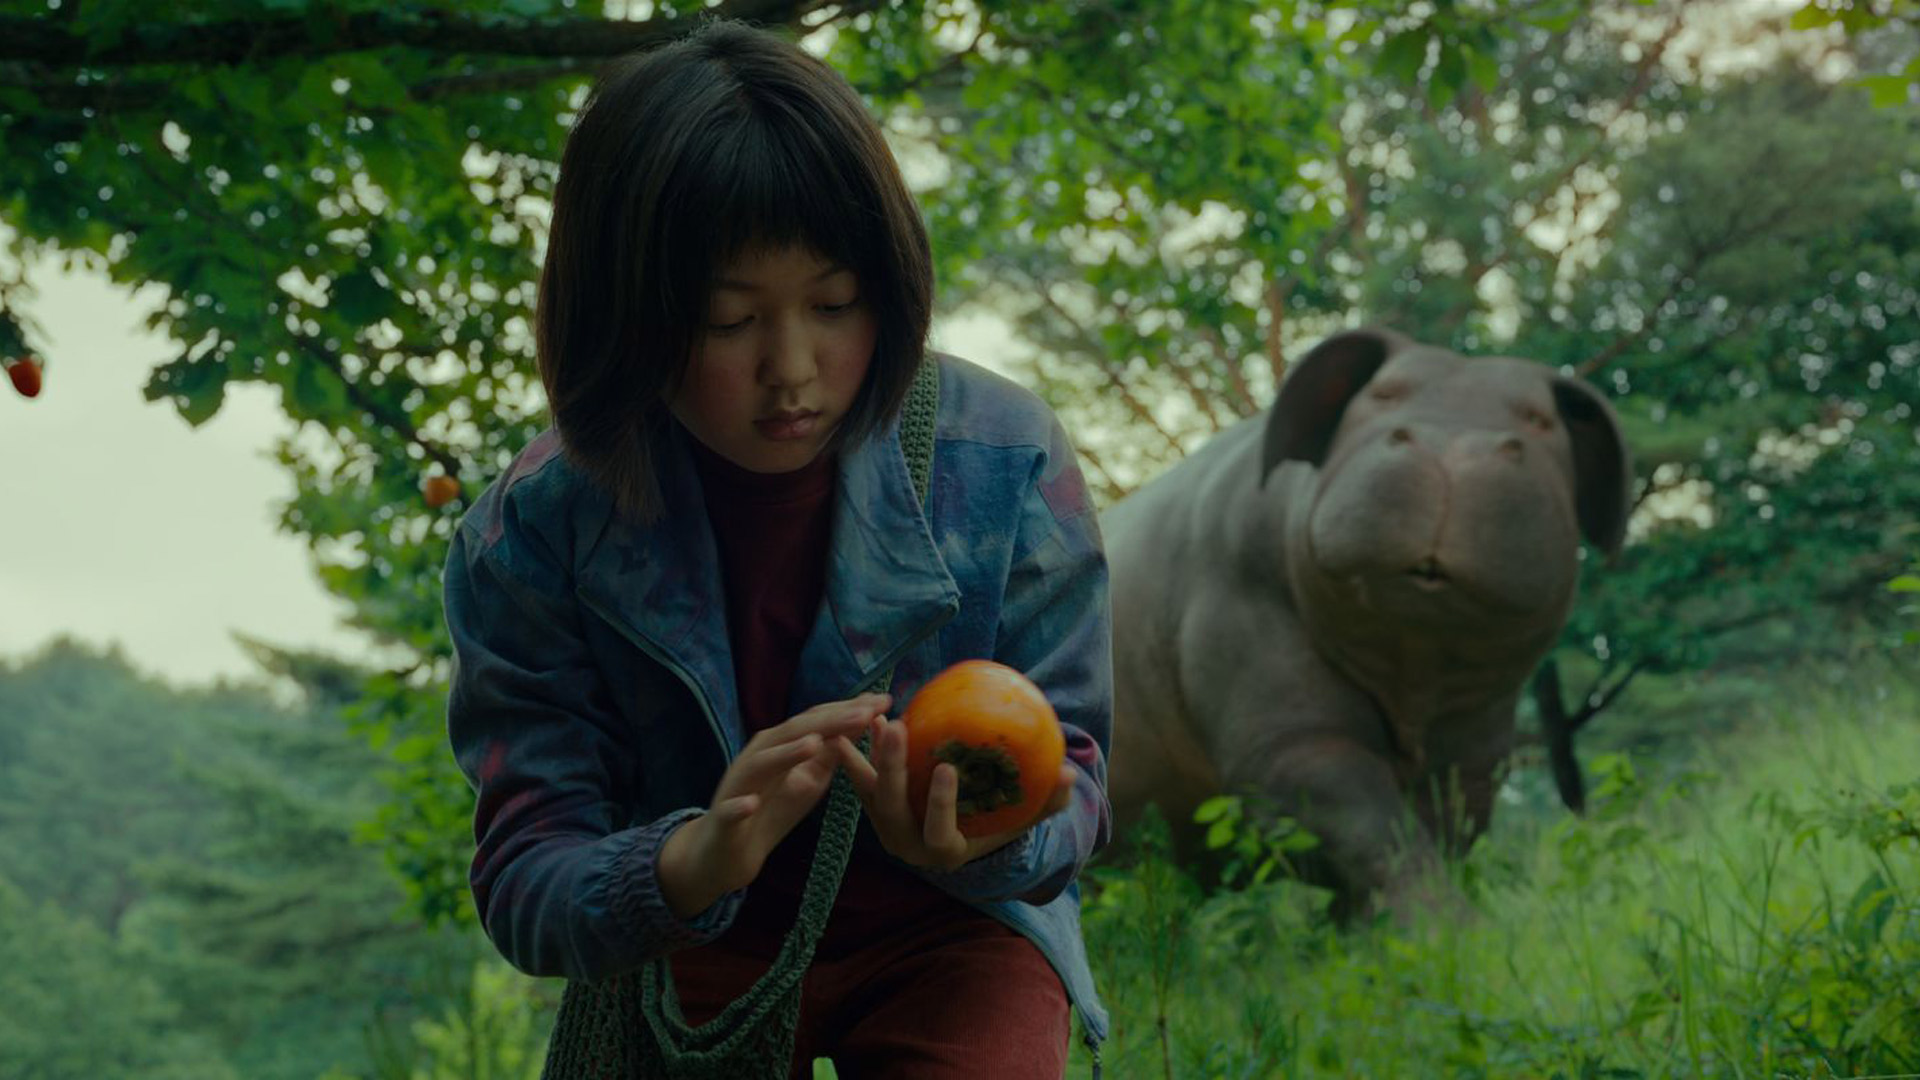 okja and the kid girl fruit at the forrest 